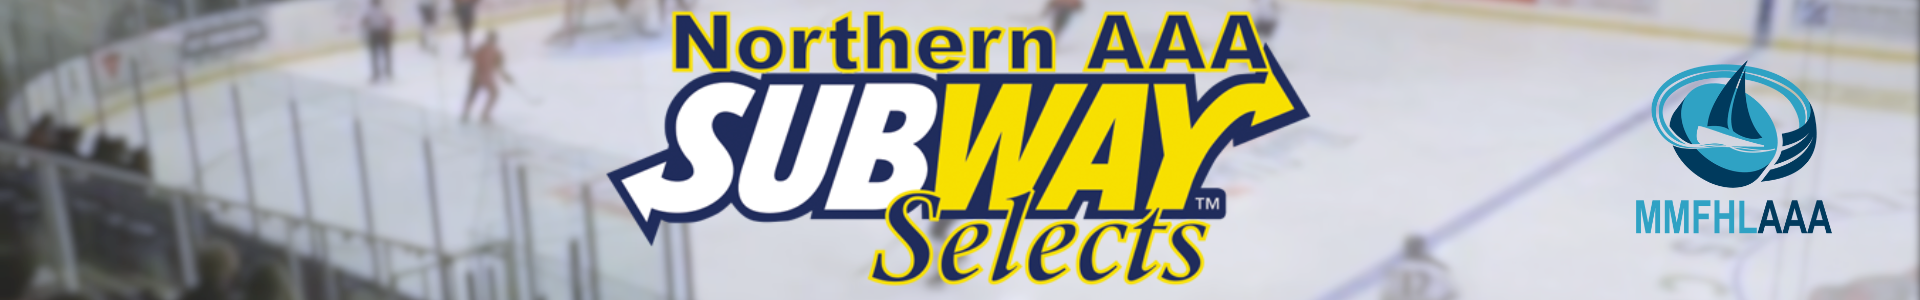 MMFHL - Northern Subway Selects